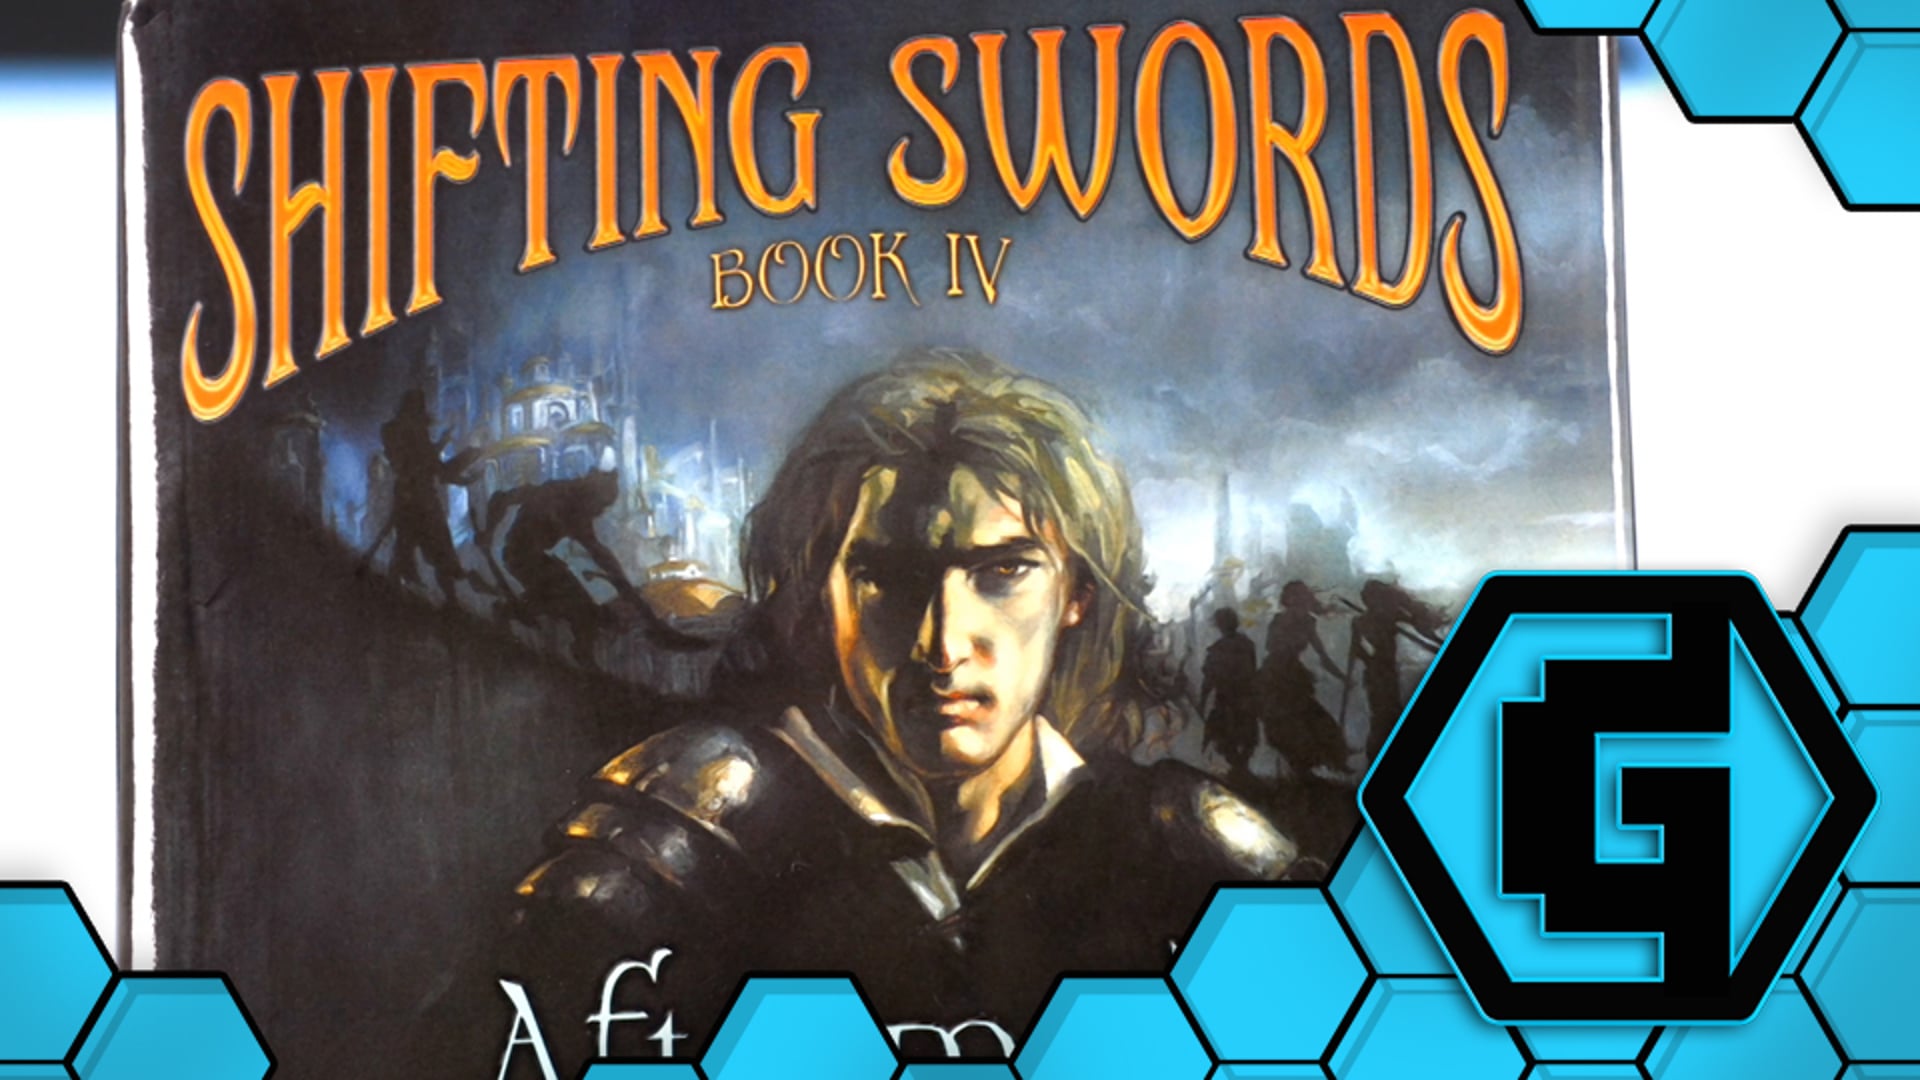 The Geekery View - Shifting Swords Book